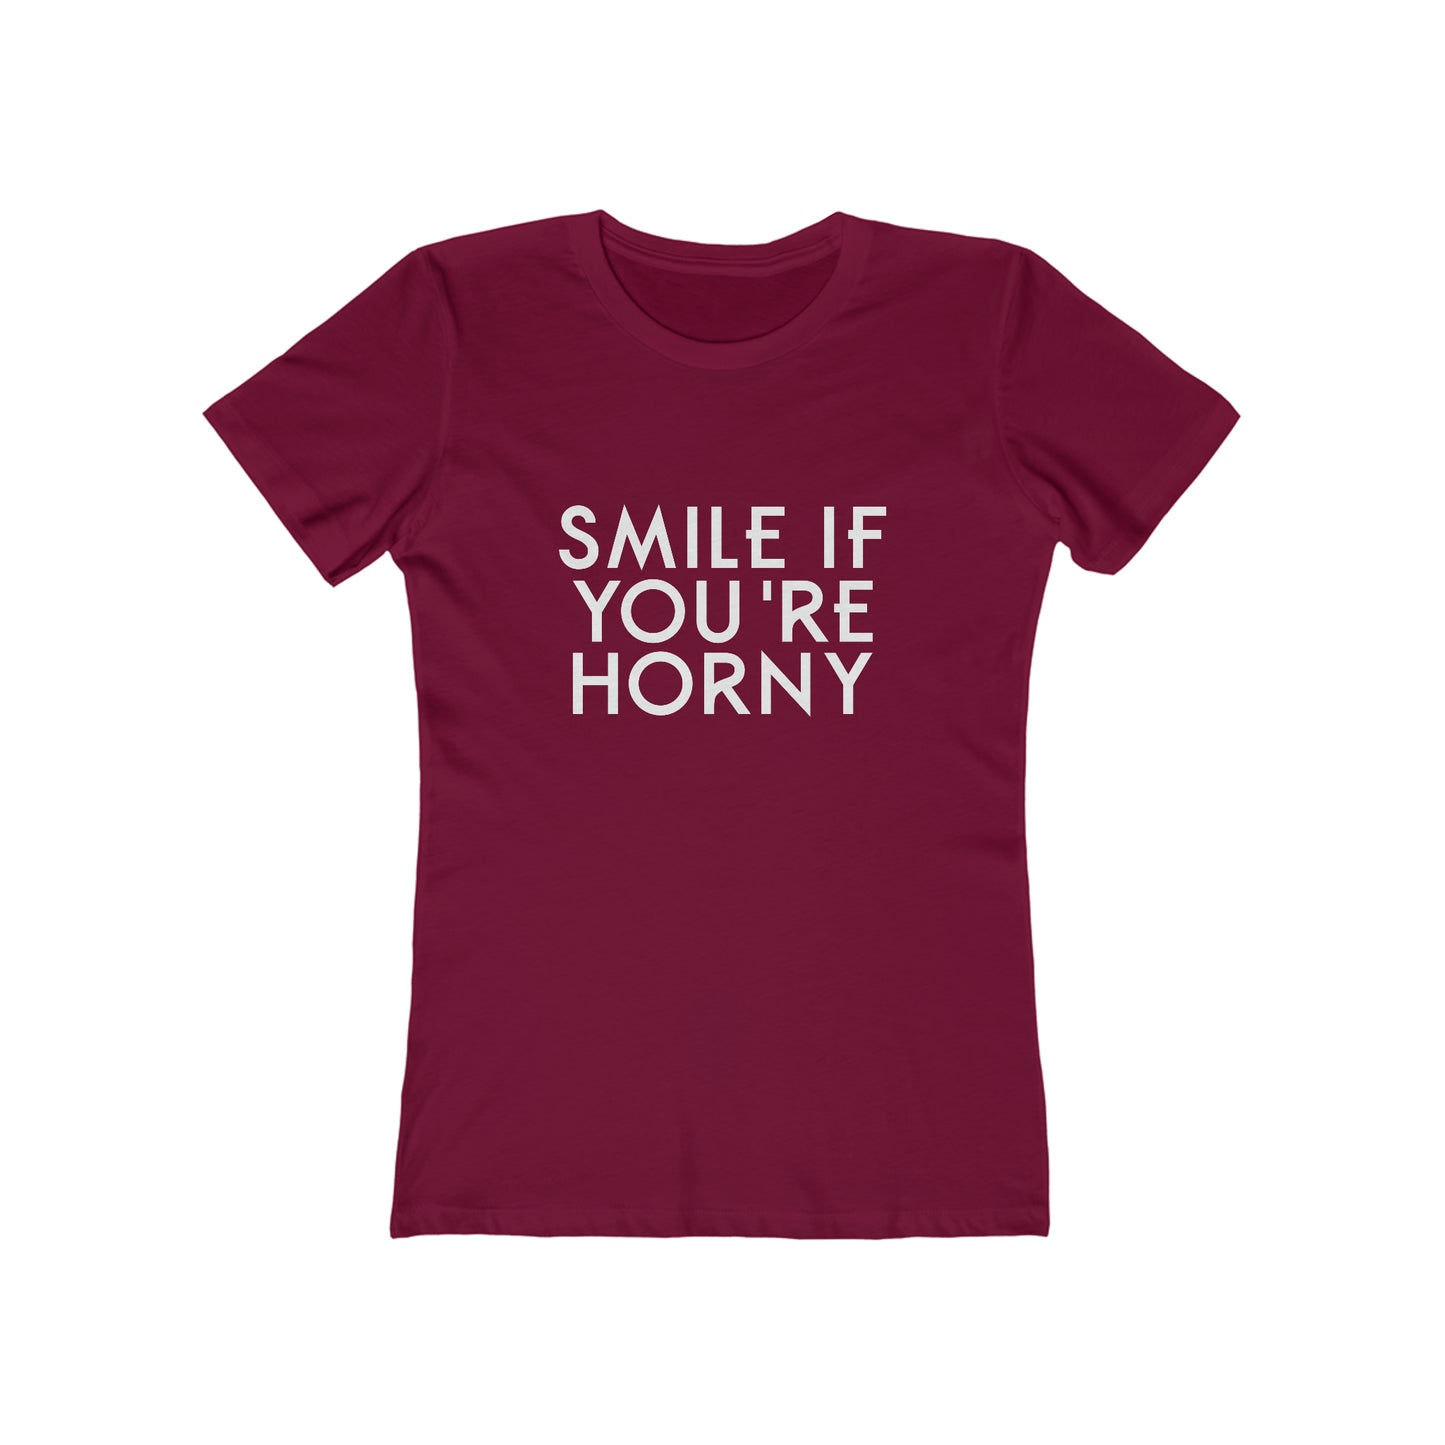 Smile If You're Horny - Women's T-shirt